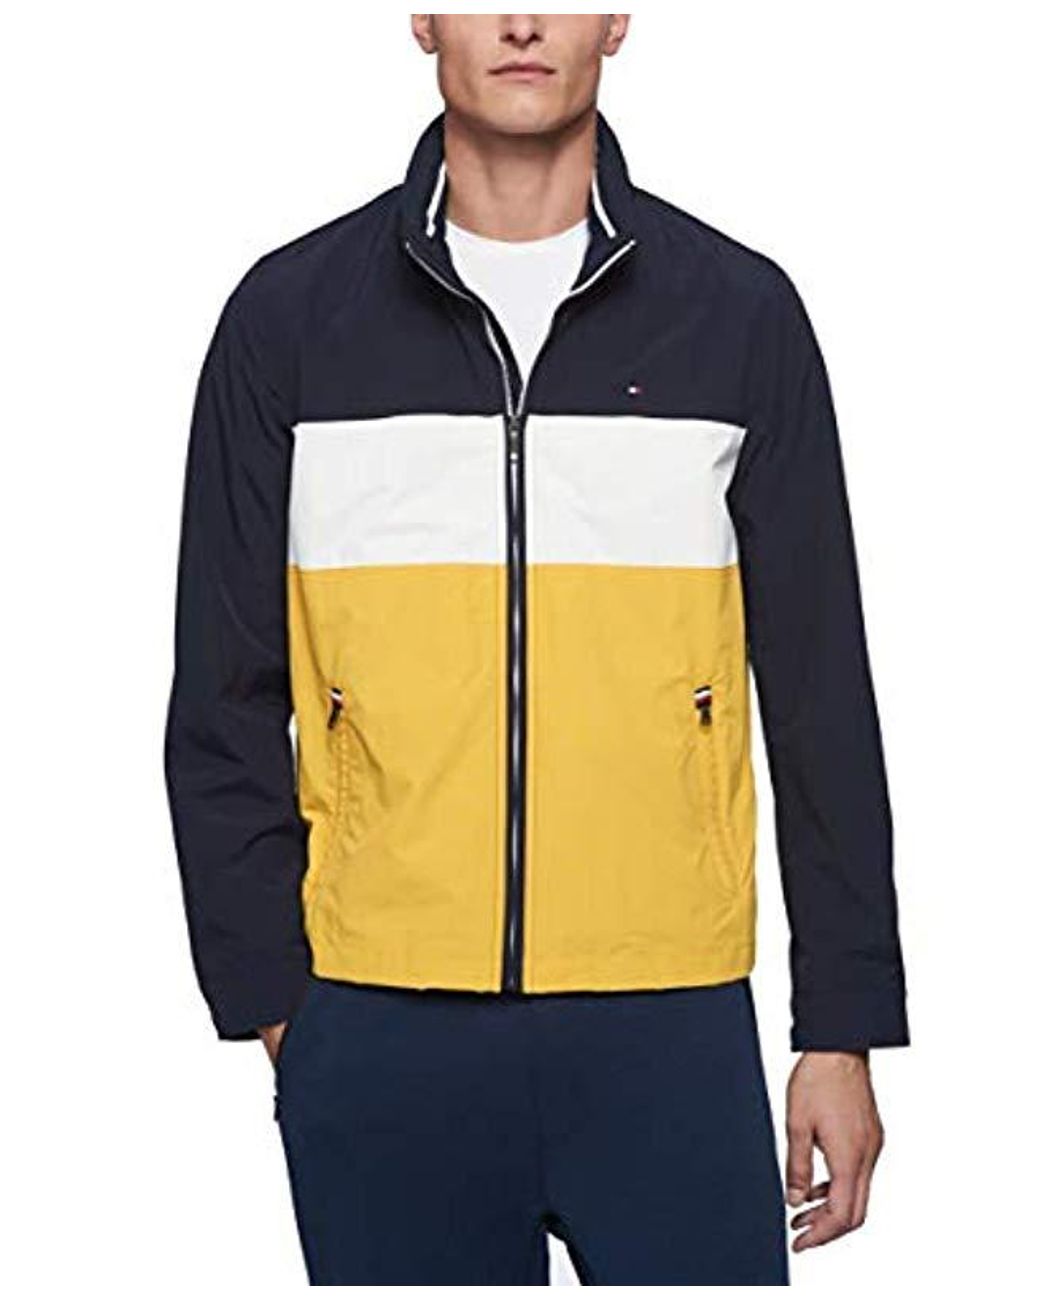 Tommy Hilfiger Stand Collar Lightweight Yachting Jacket in Navy/Ice ...